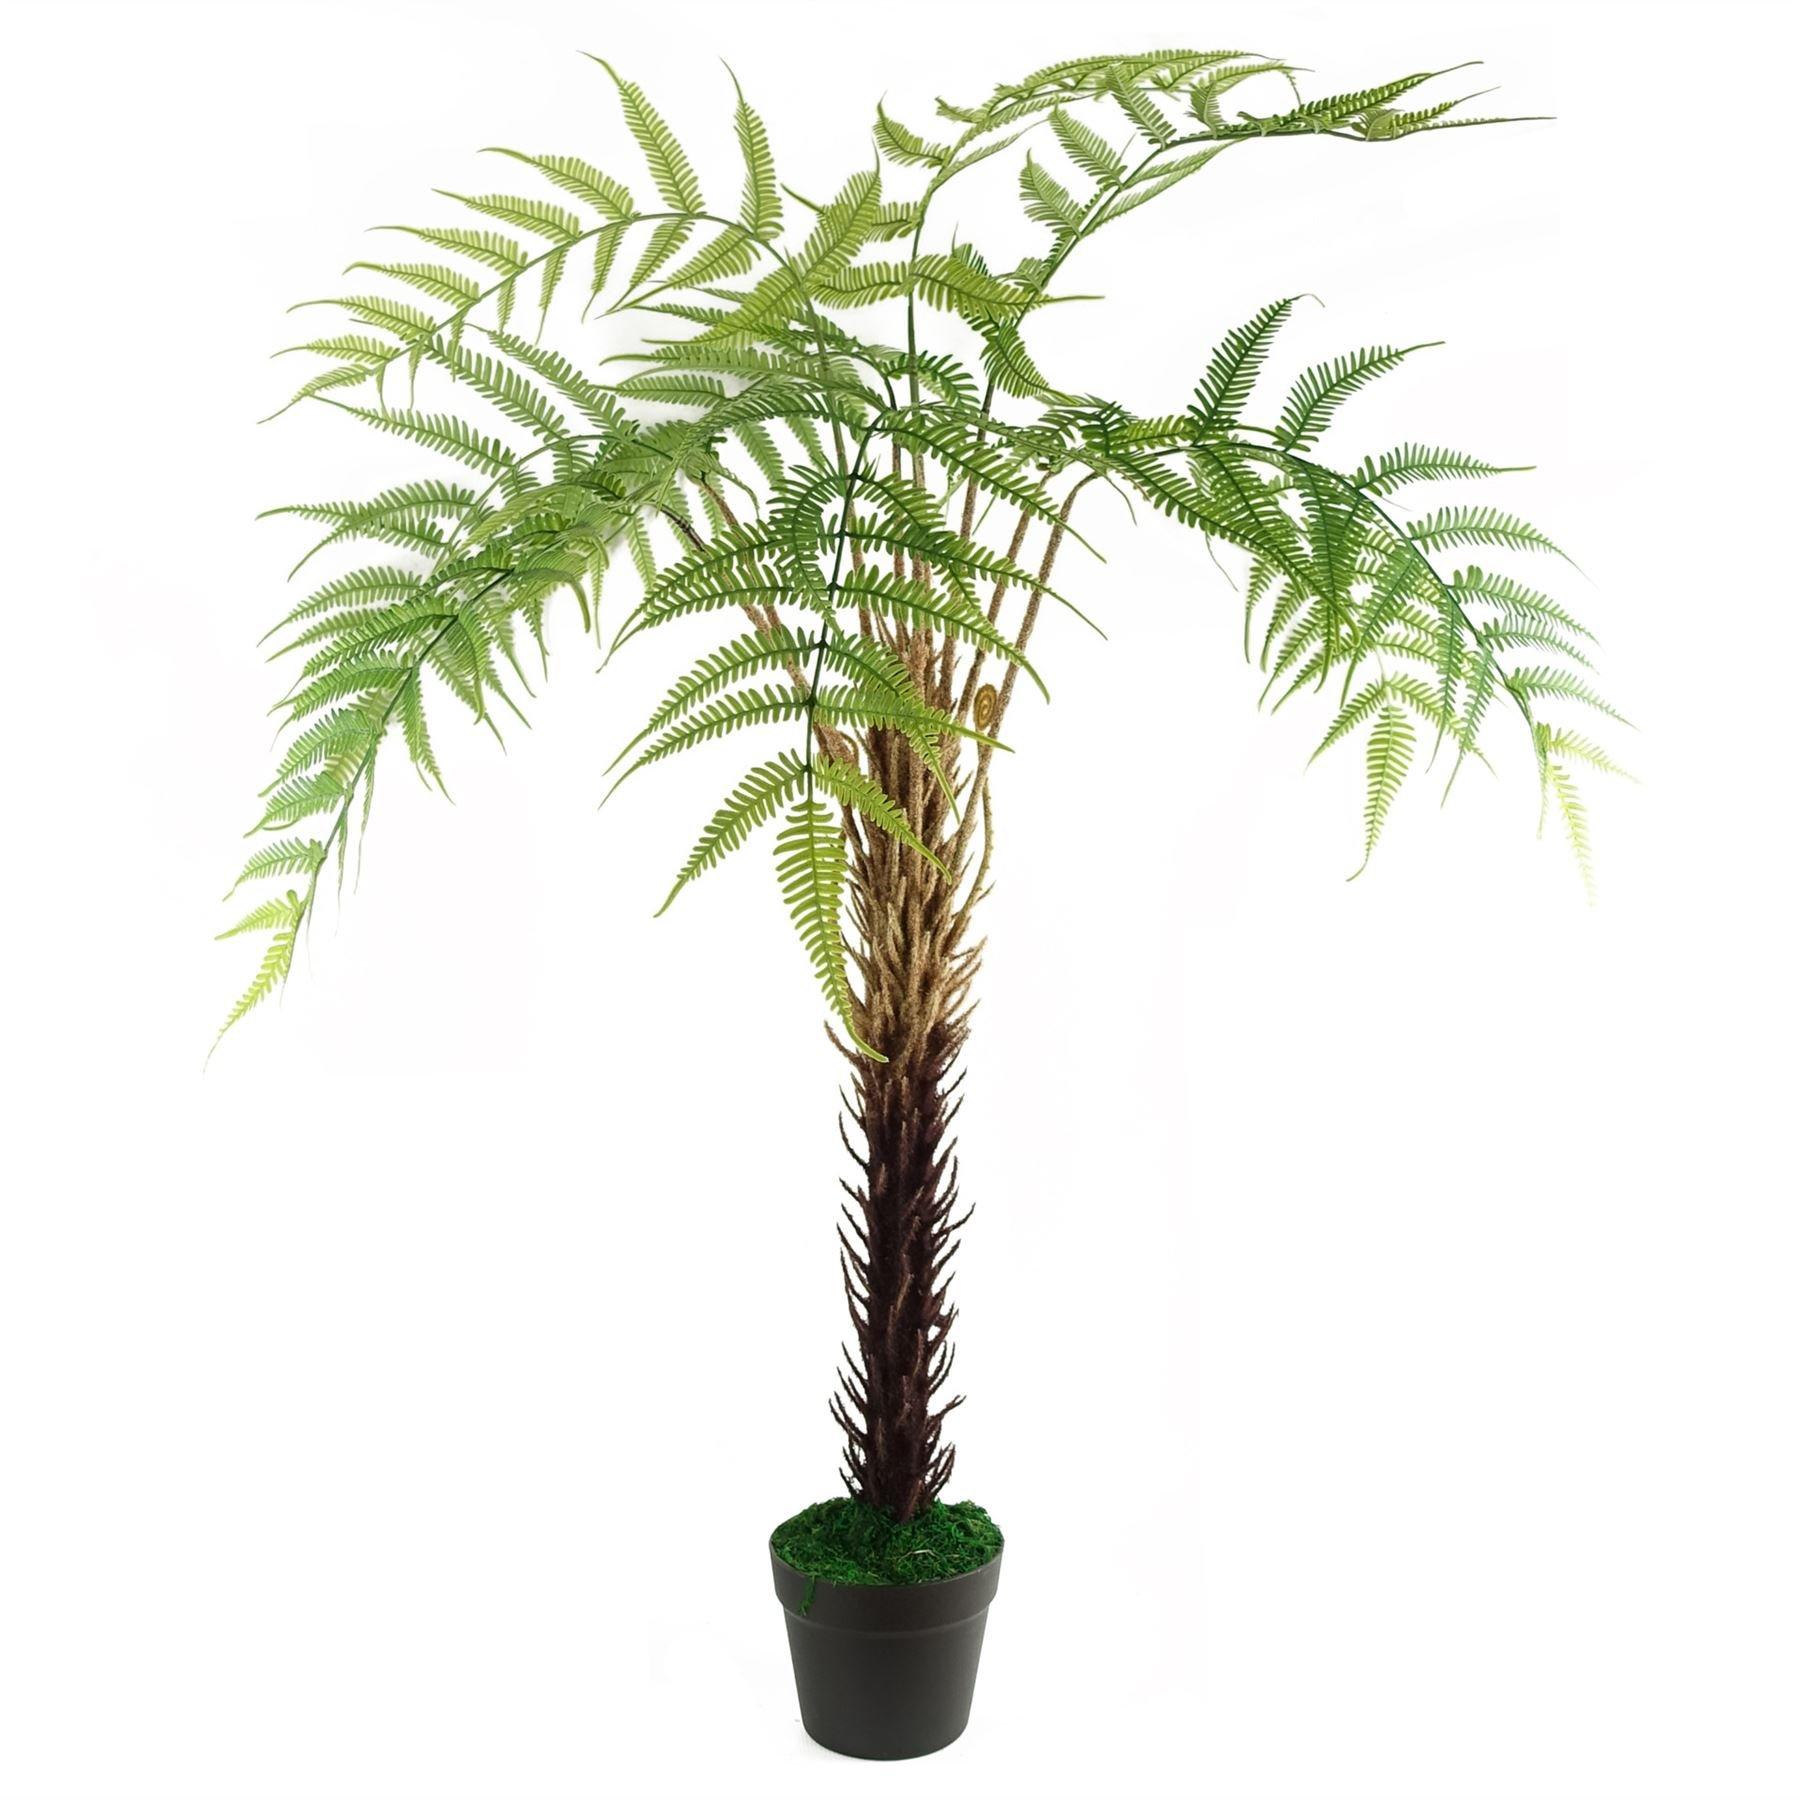 Artificial Fern Tree Large Realistic